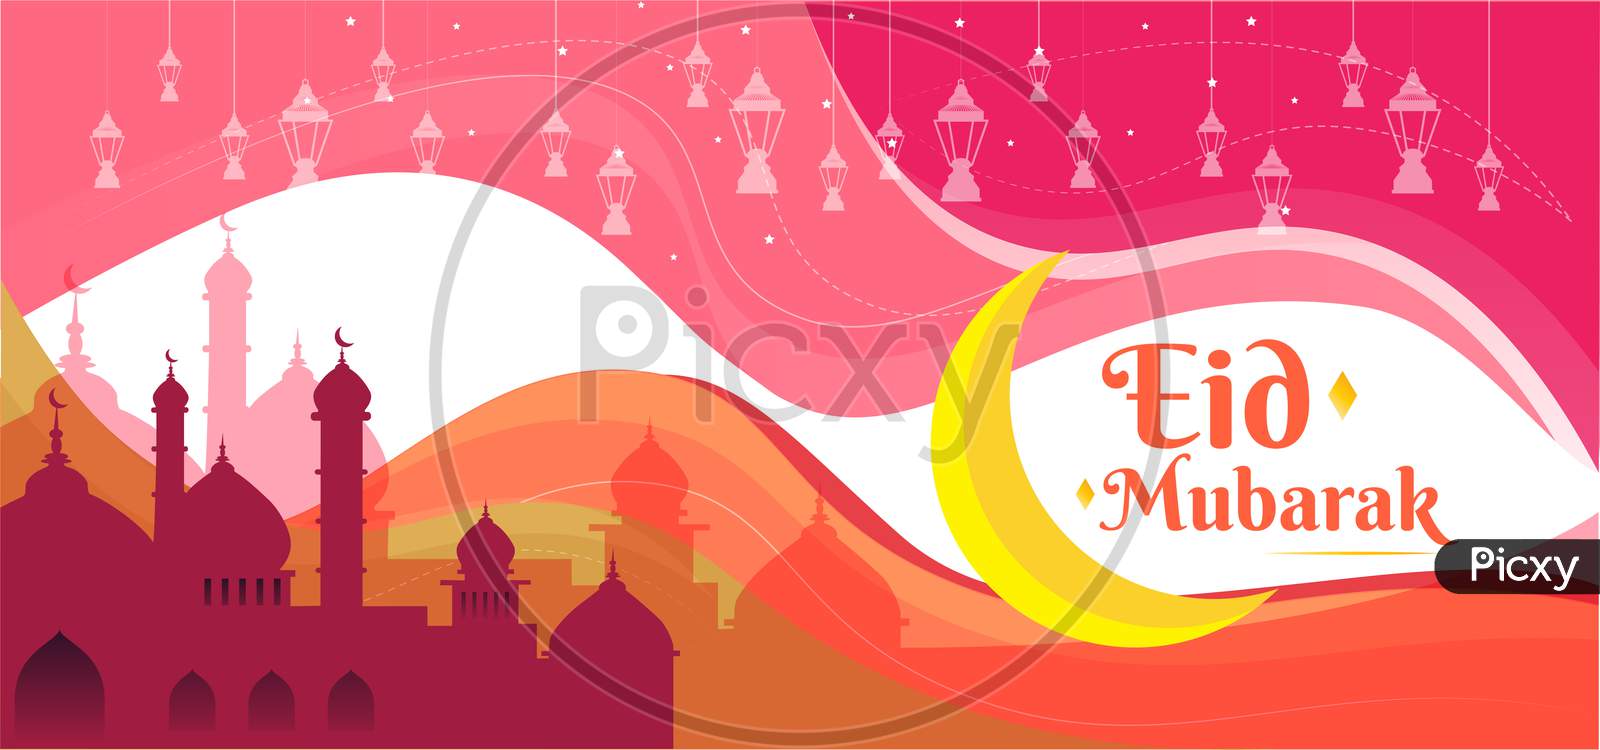 Eid Mubarak Colorful Abstract Greeting Card, Poster, Vector Illustration